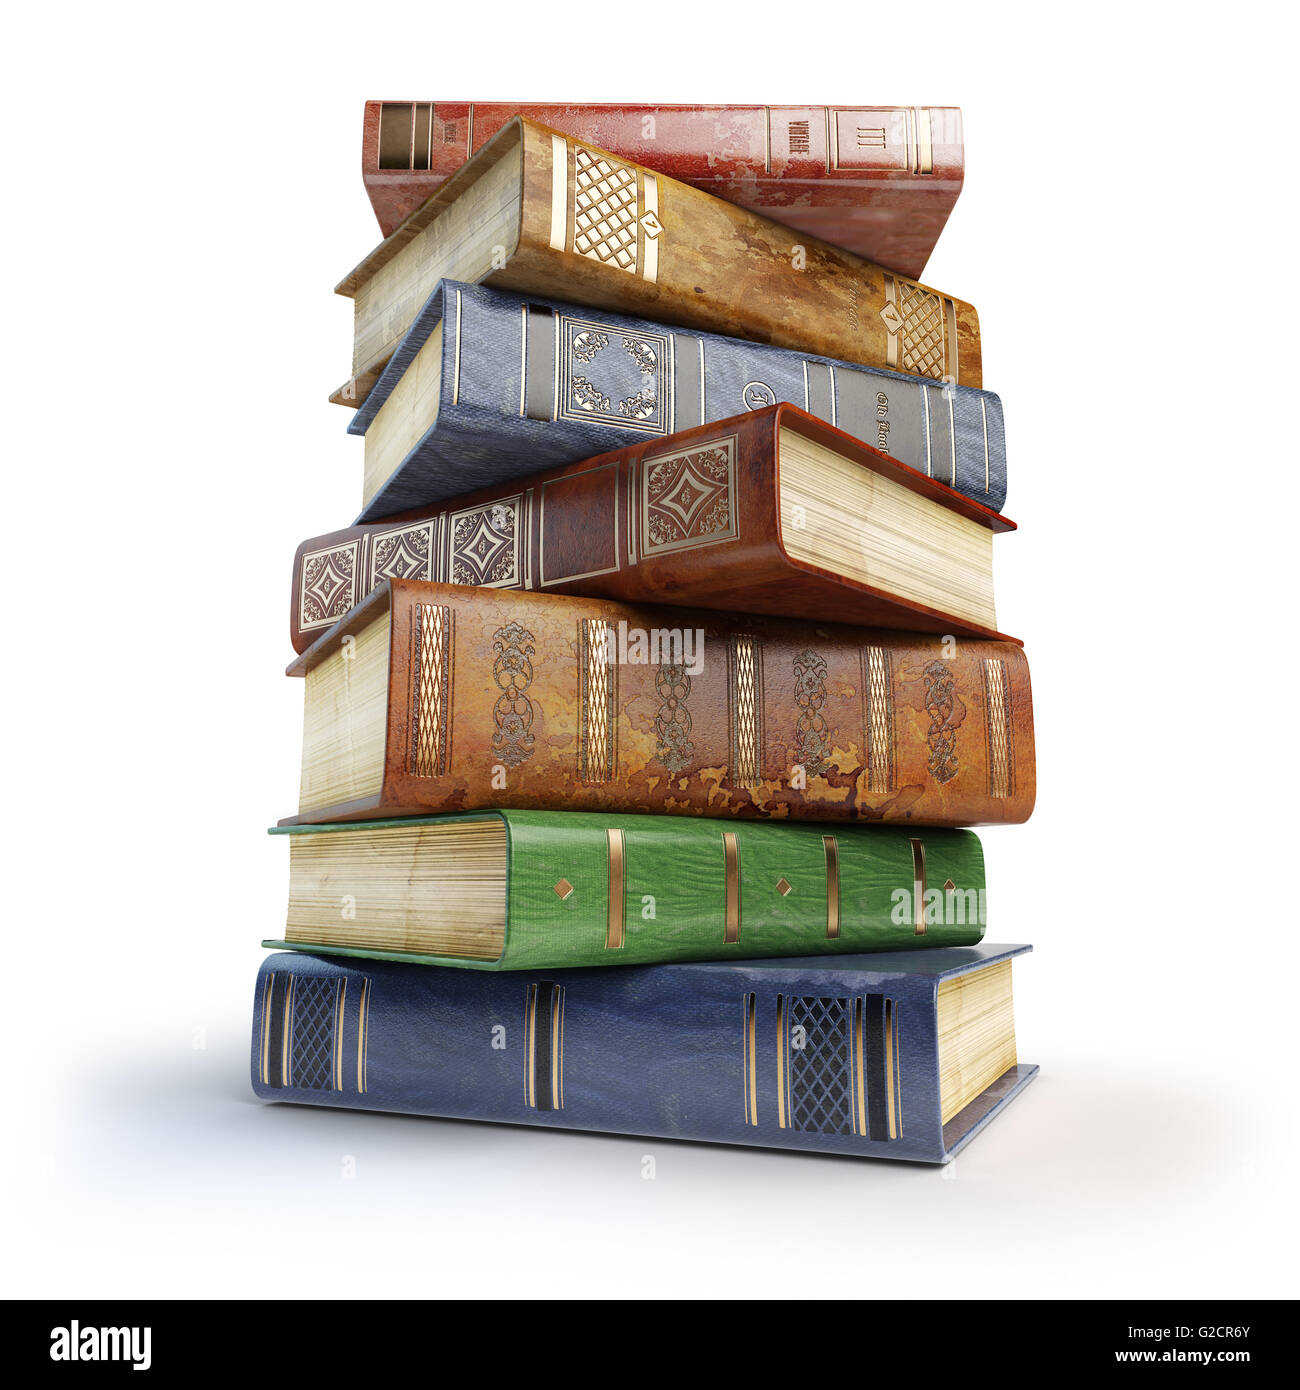 stack of books images